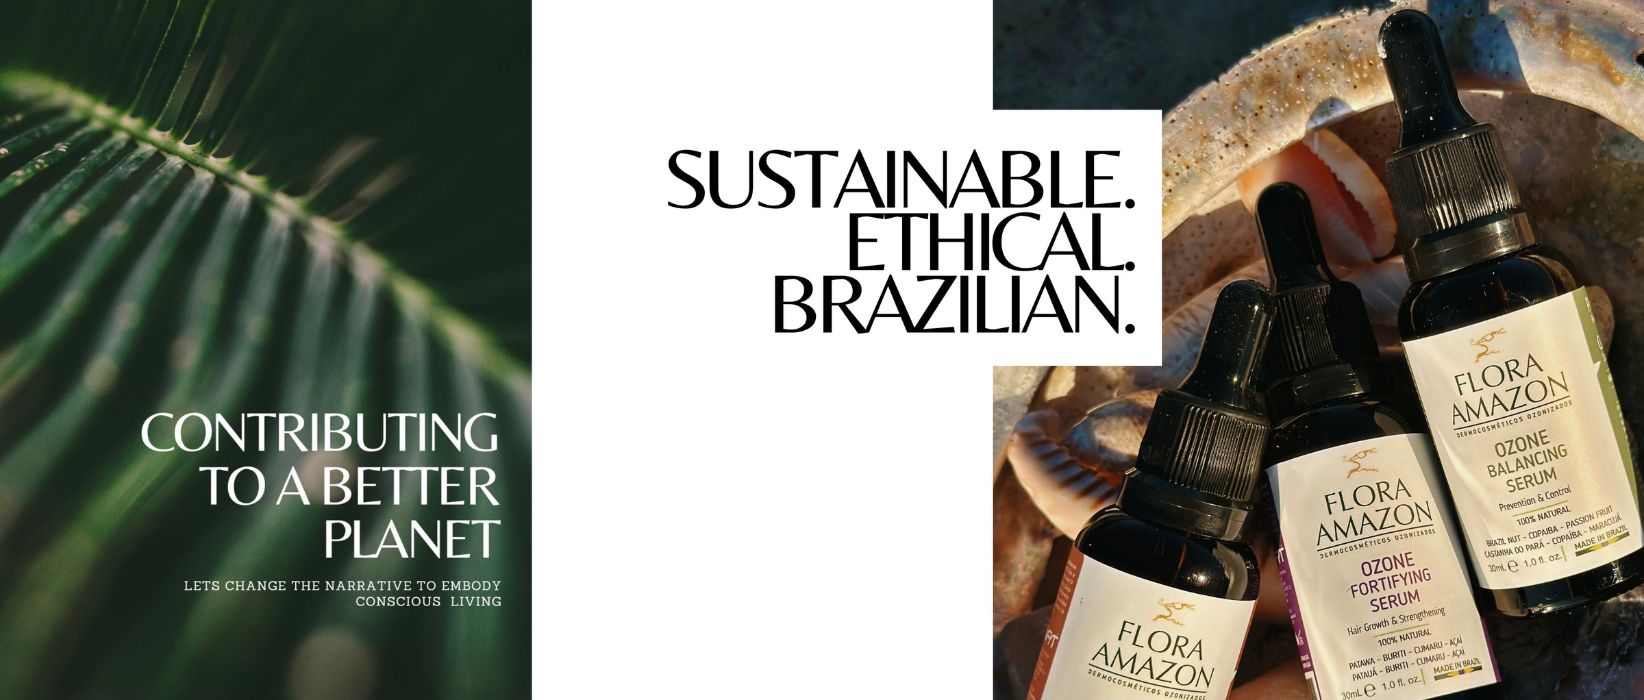 flora amazon contributing to a better planet with sustainable and ethical products from brazil.